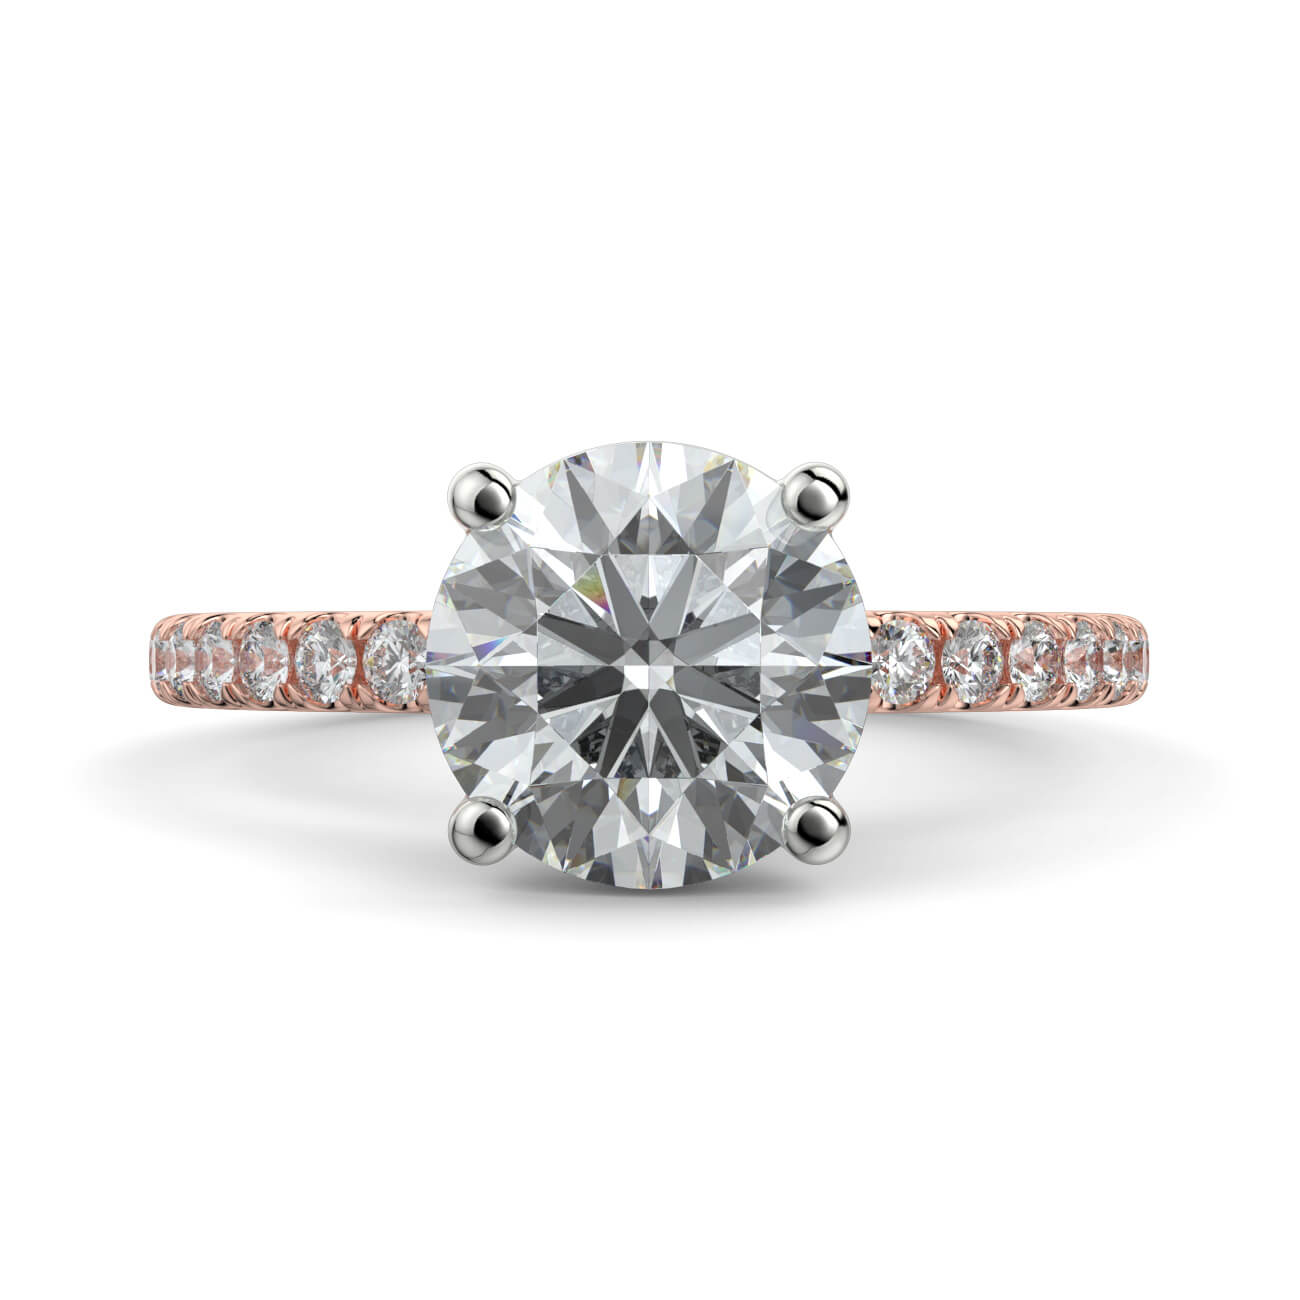 Delicate ‘Liat’ 4 Claw Diamond Engagement Ring in 18k Rose and White Gold – Australian Diamond Network